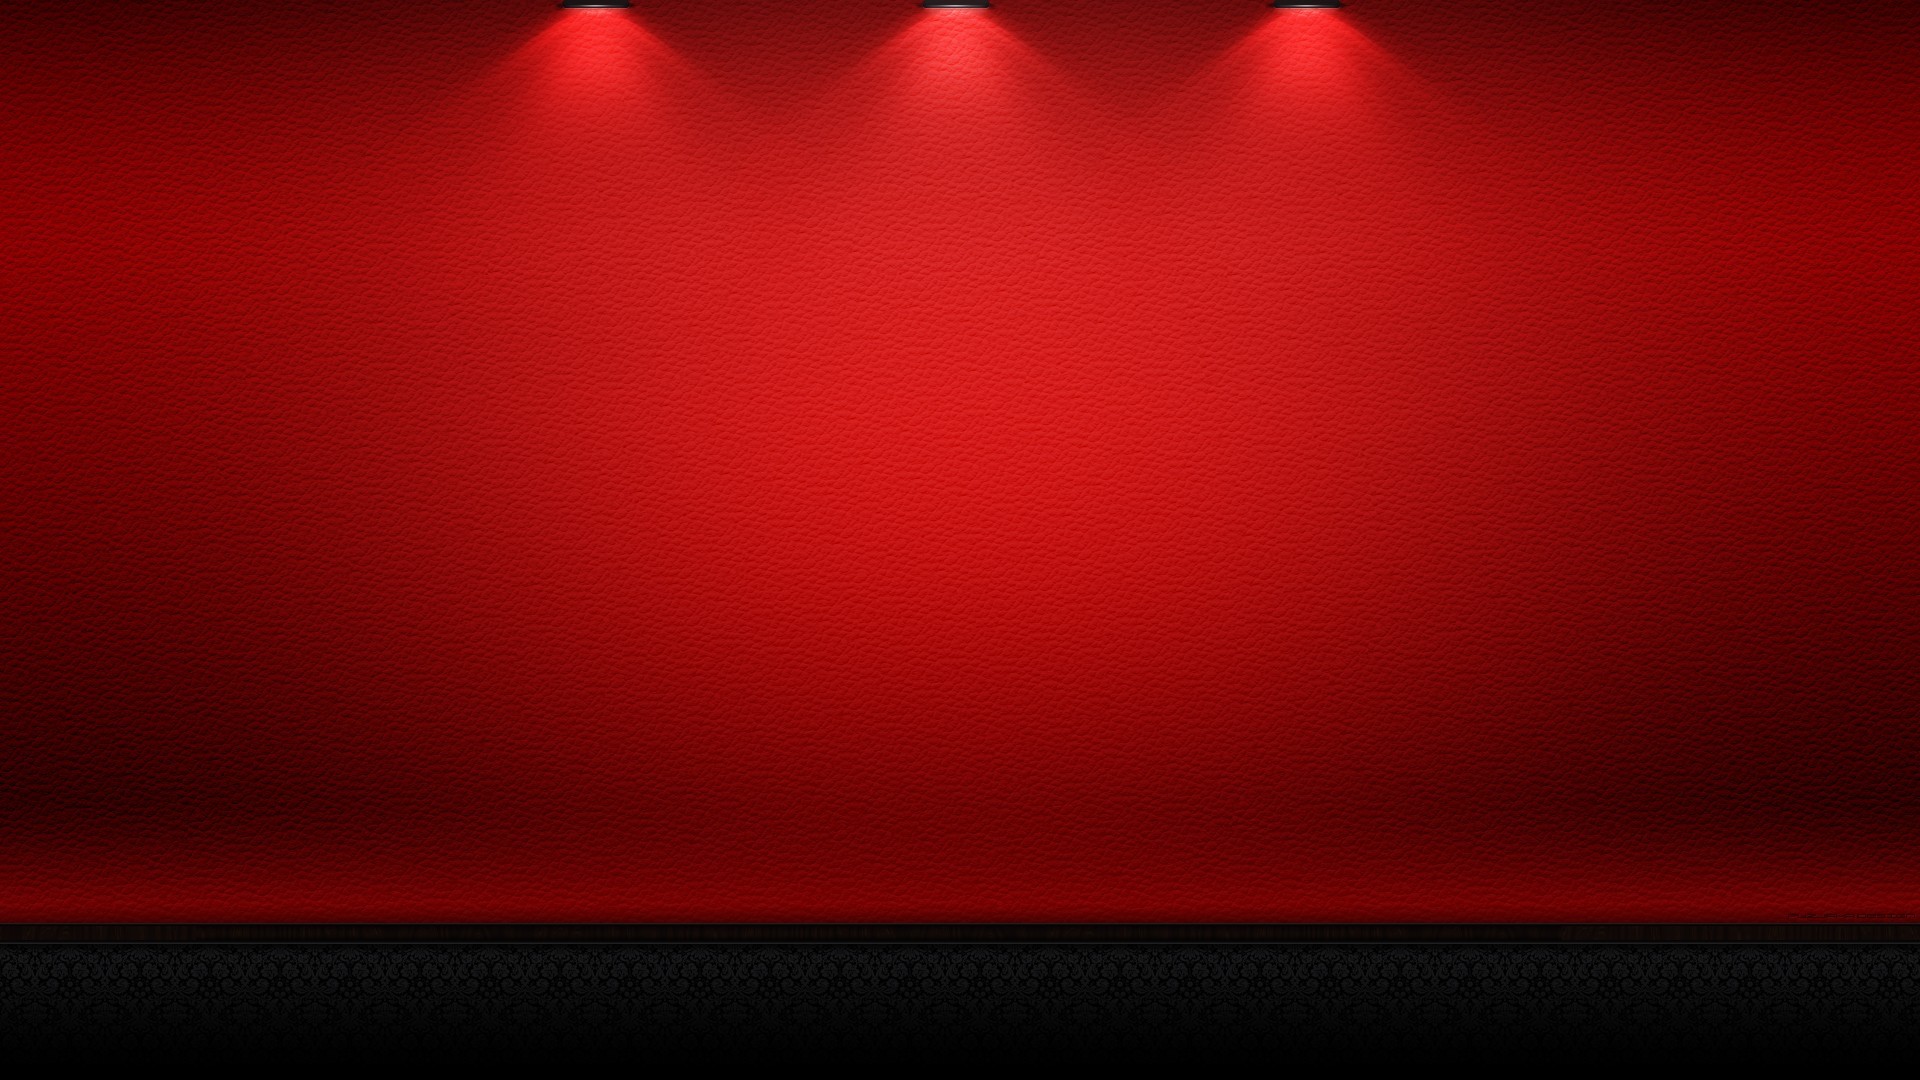  Red background HD    Download free beautiful full HD  